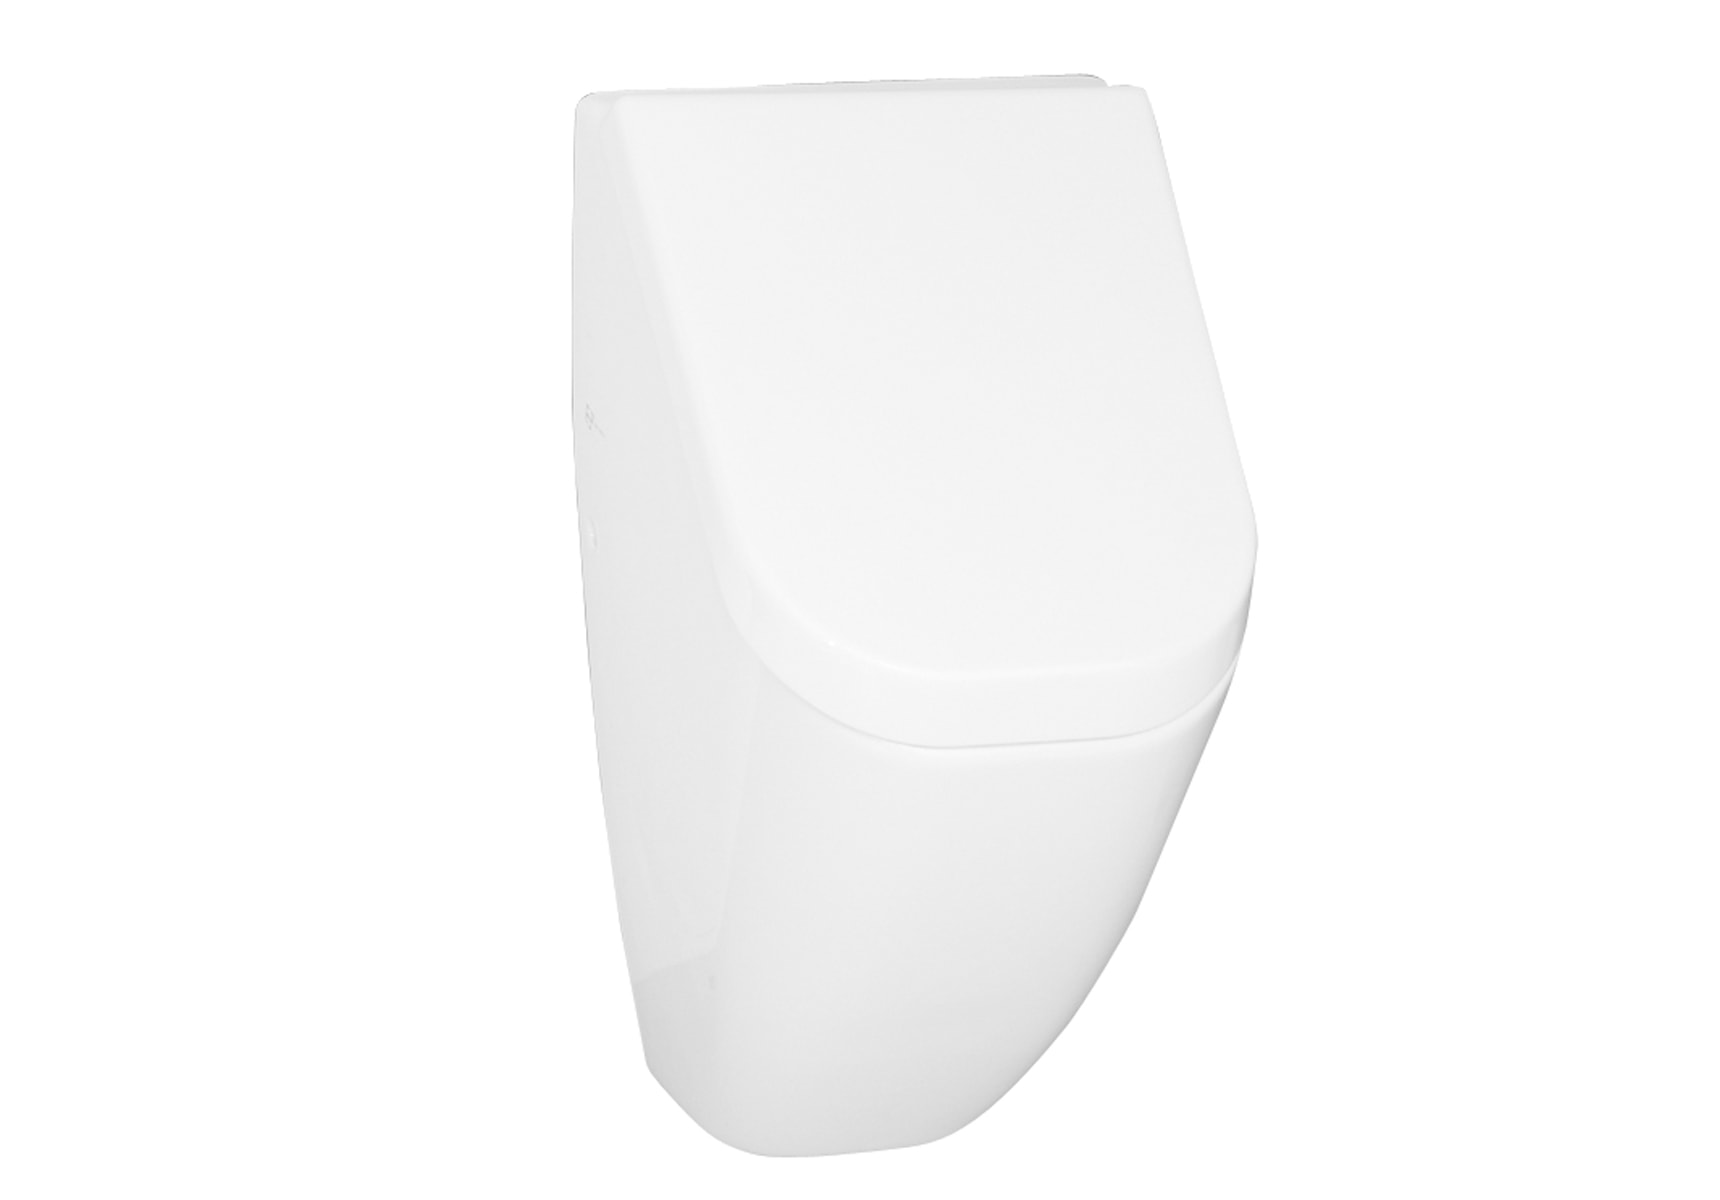 Retro Urinal with Lid Incloding Led Back Inlet, Back Output